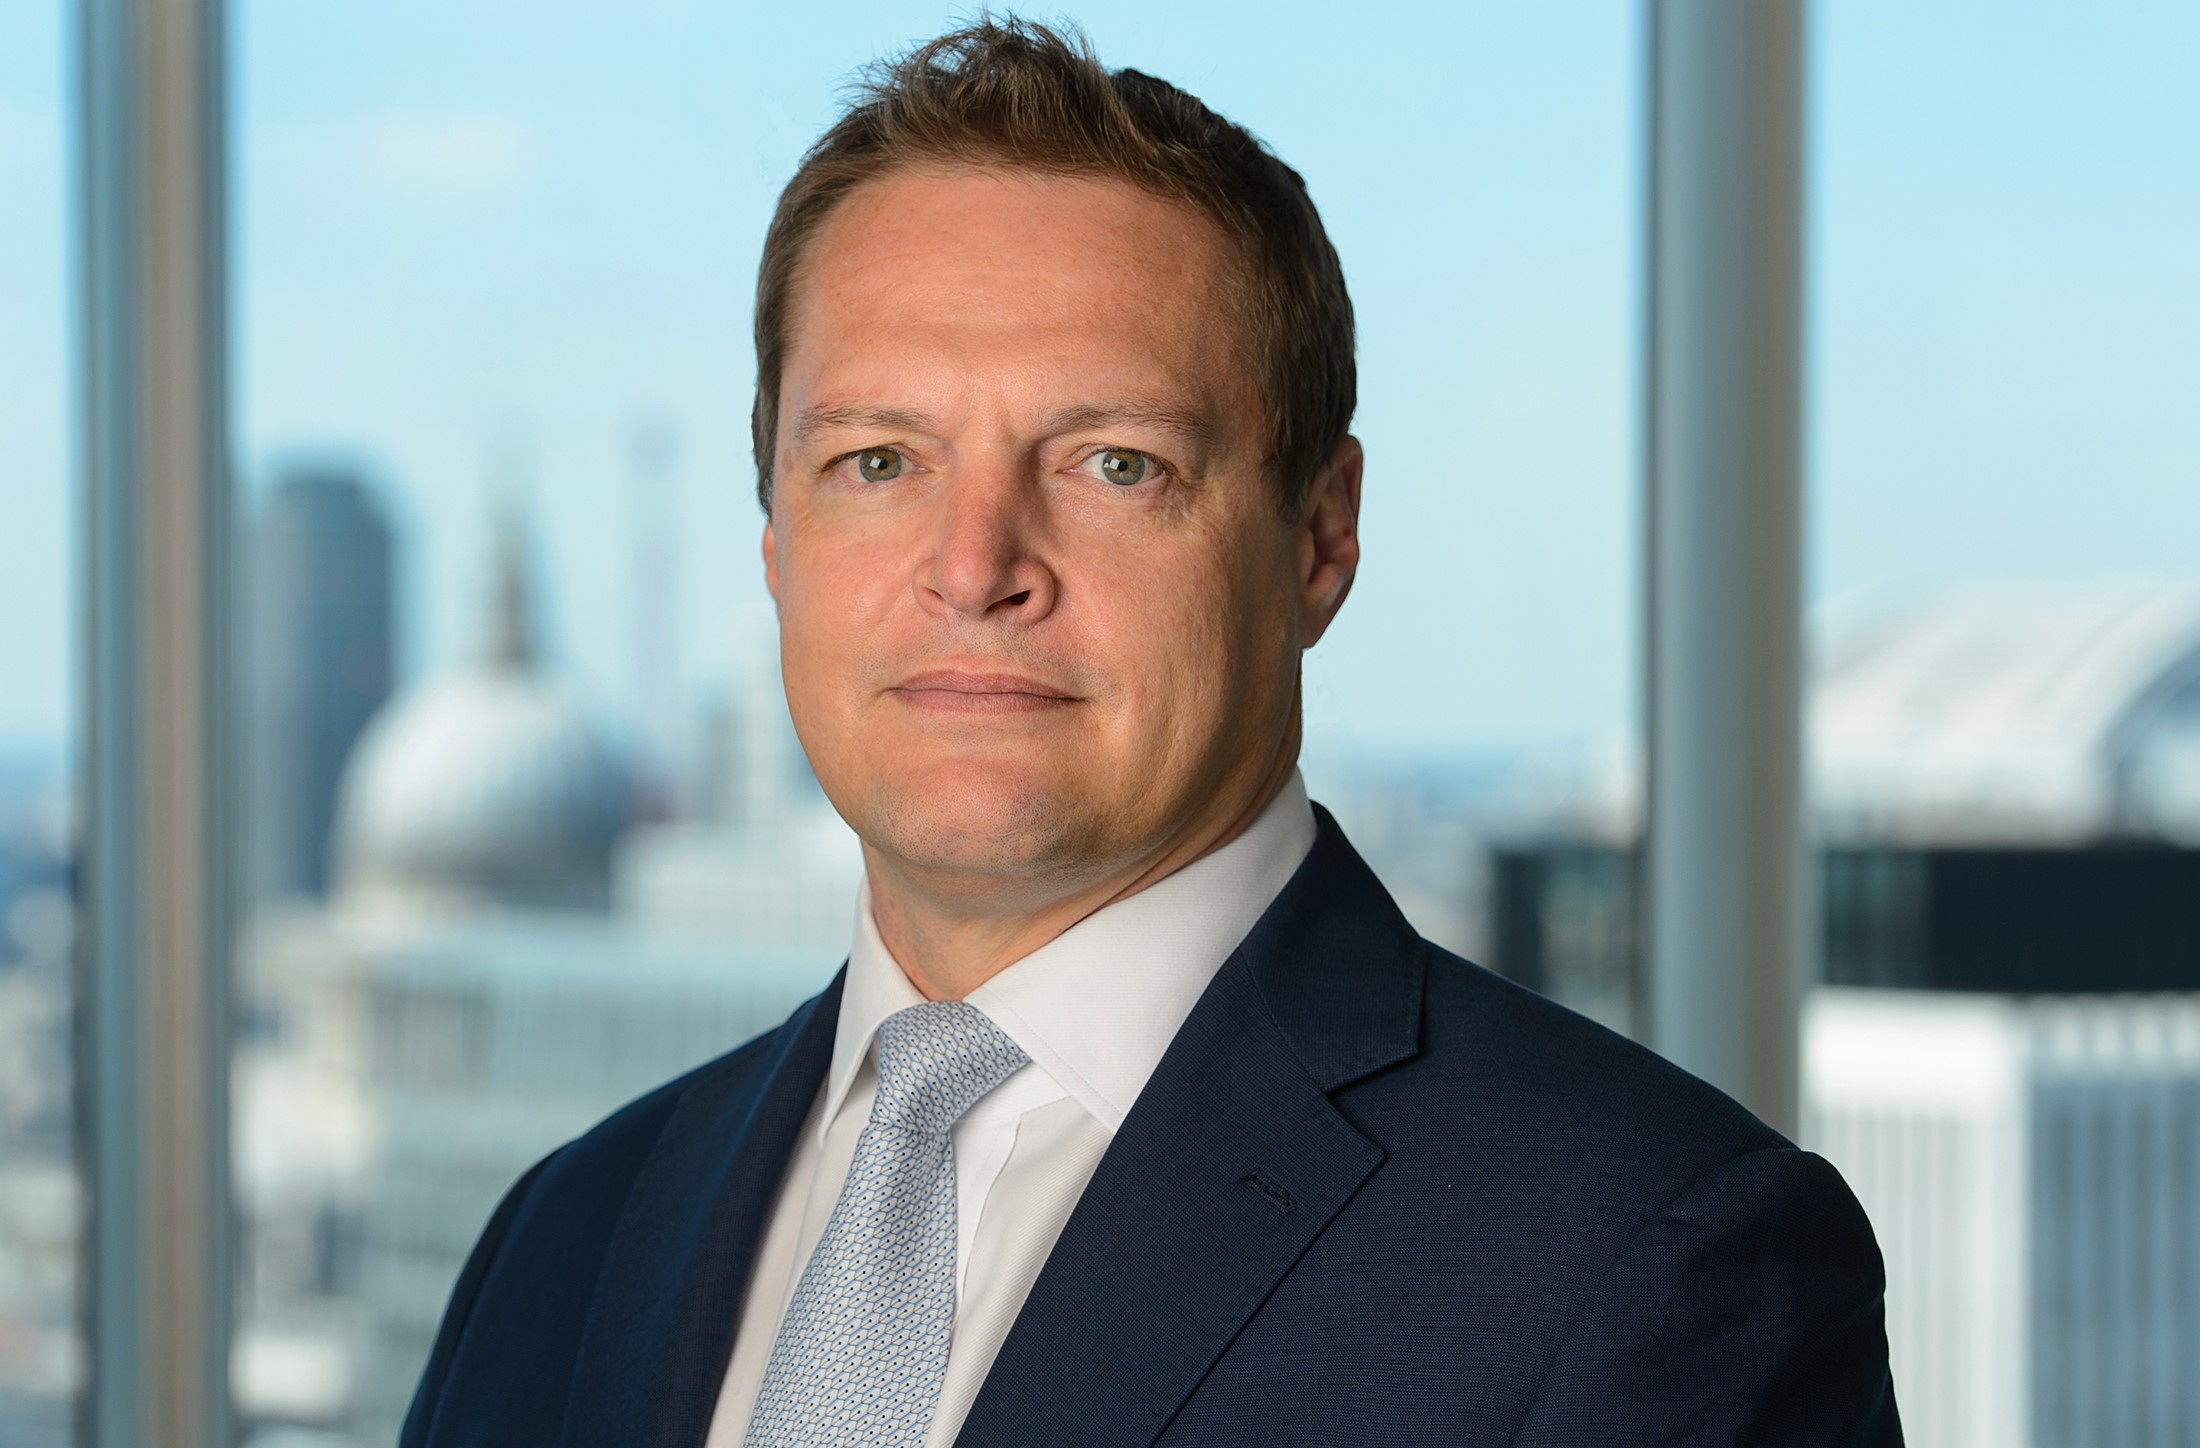 Gavin Gordon: Private Equity – the continued move to private capital  (was 23 June 2022, postponed)